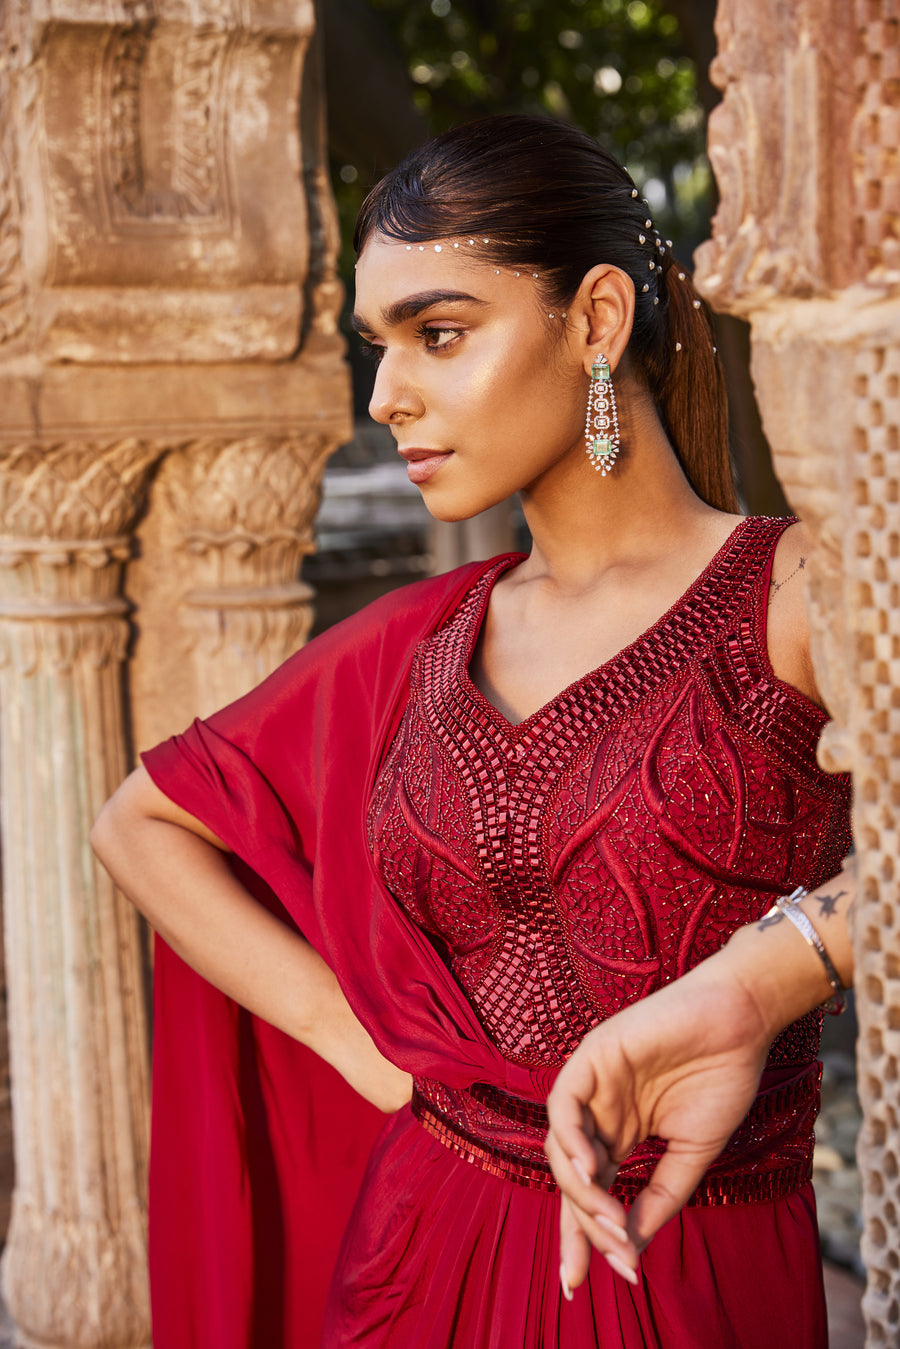 Young Woman in an elegant Red Saree Dress Posing Outdoors · Free Stock Photo